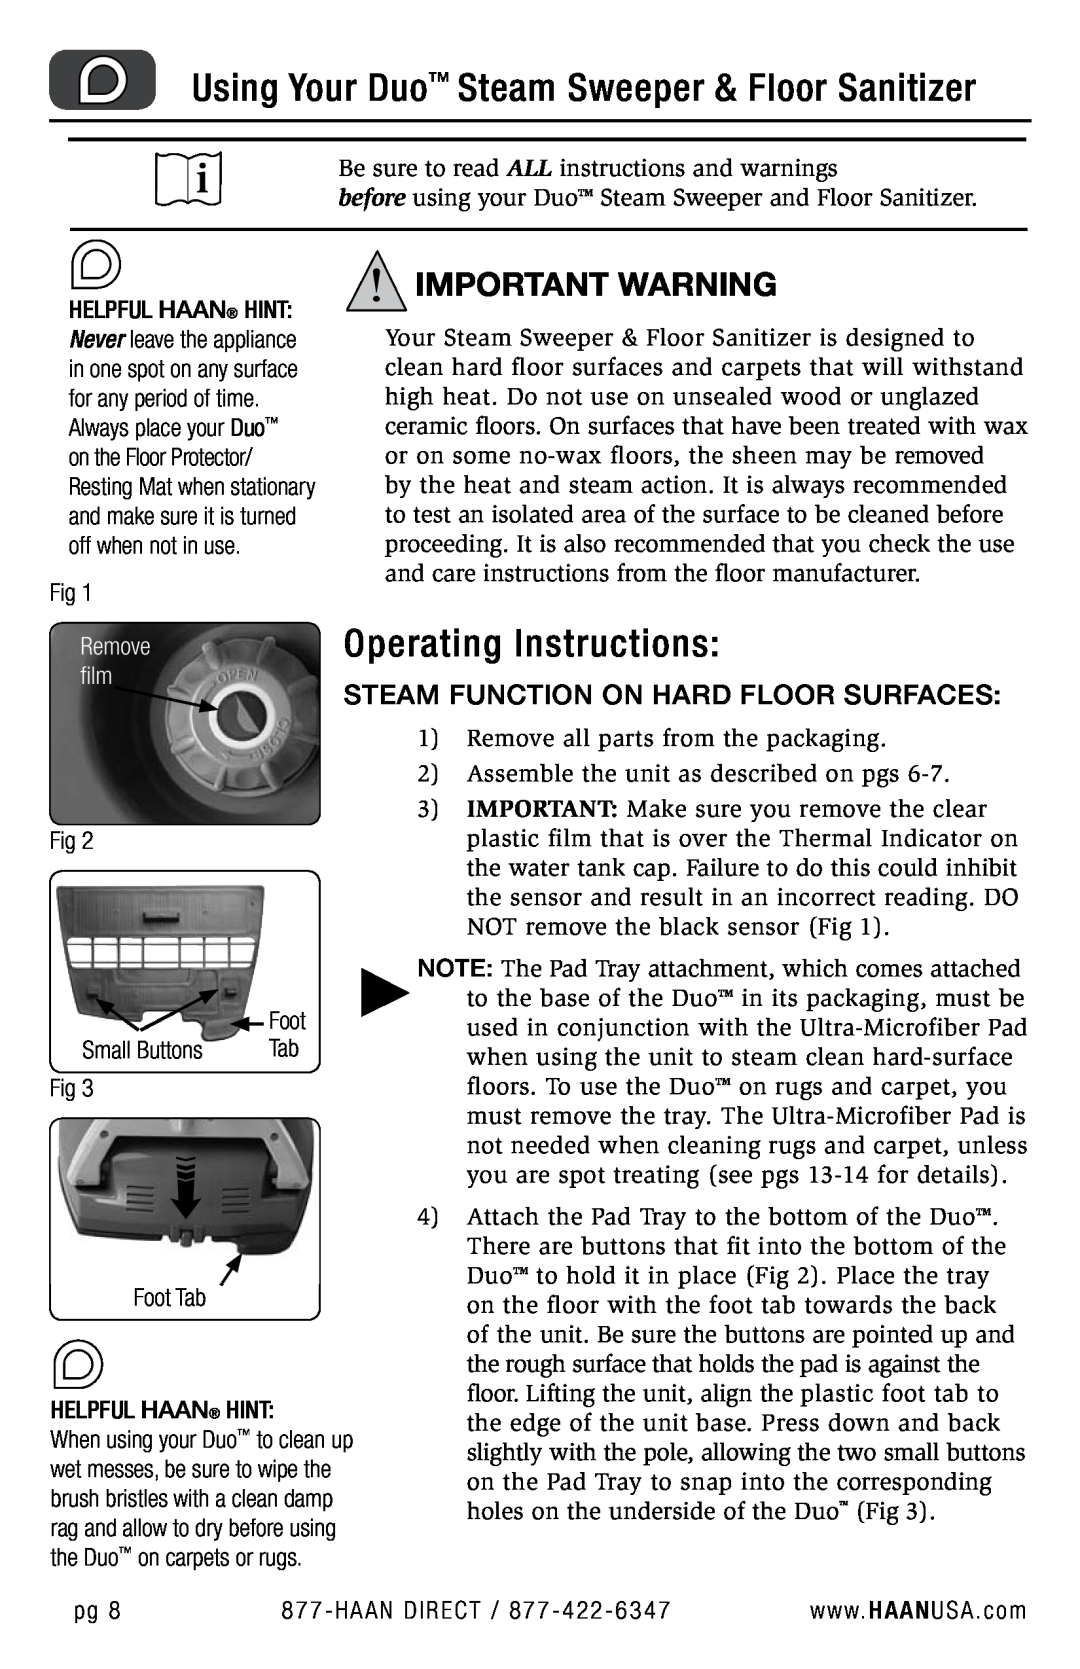 Haan HD-50 user manual Using Your Duo Steam Sweeper & Floor Sanitizer, Operating Instructions, Important Warning 